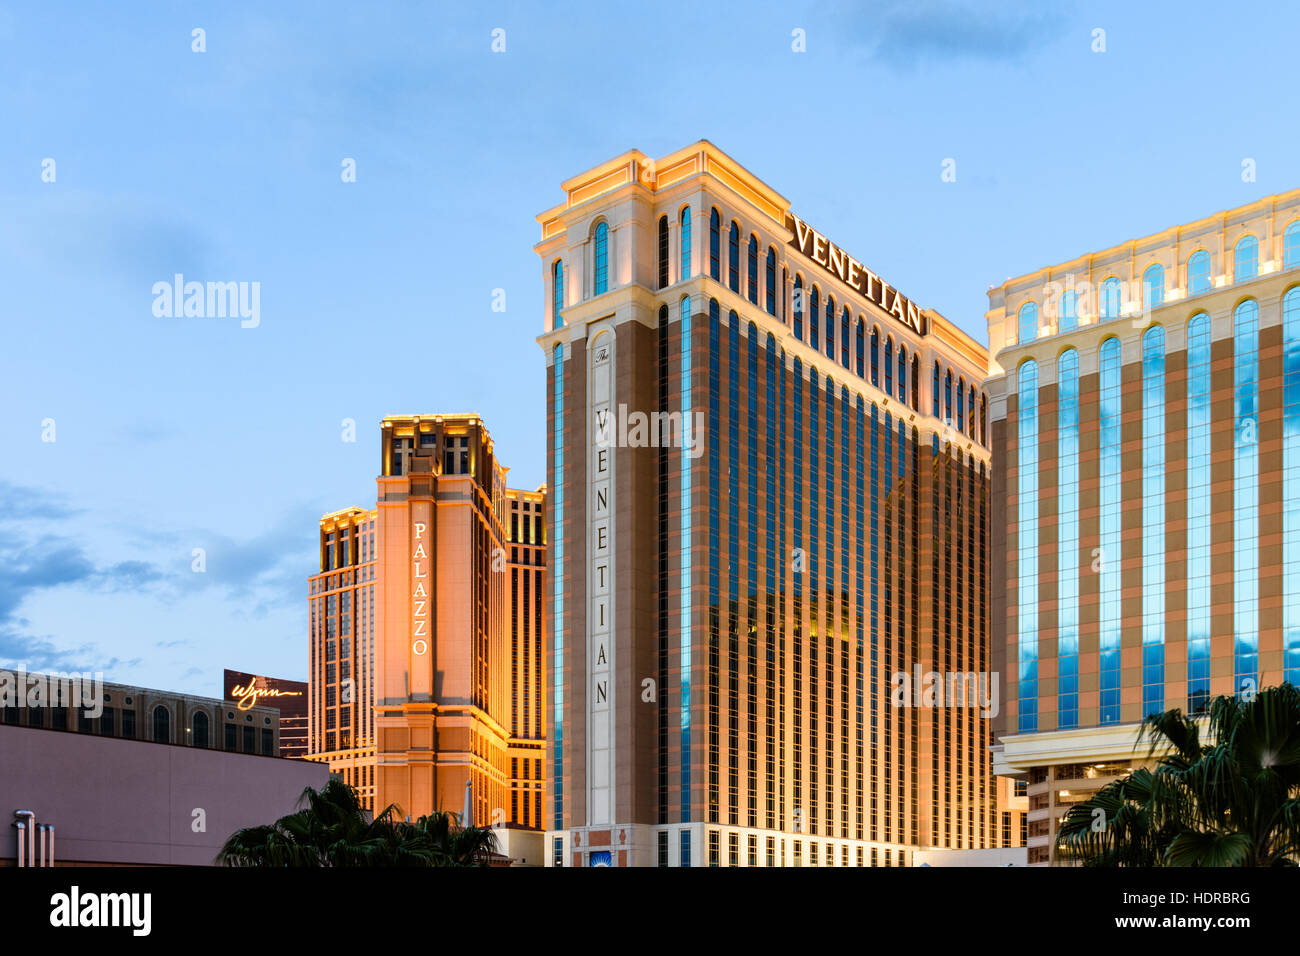 The Palazzo and Venetian hotels in Las Vegas lit with evening light Stock Photo